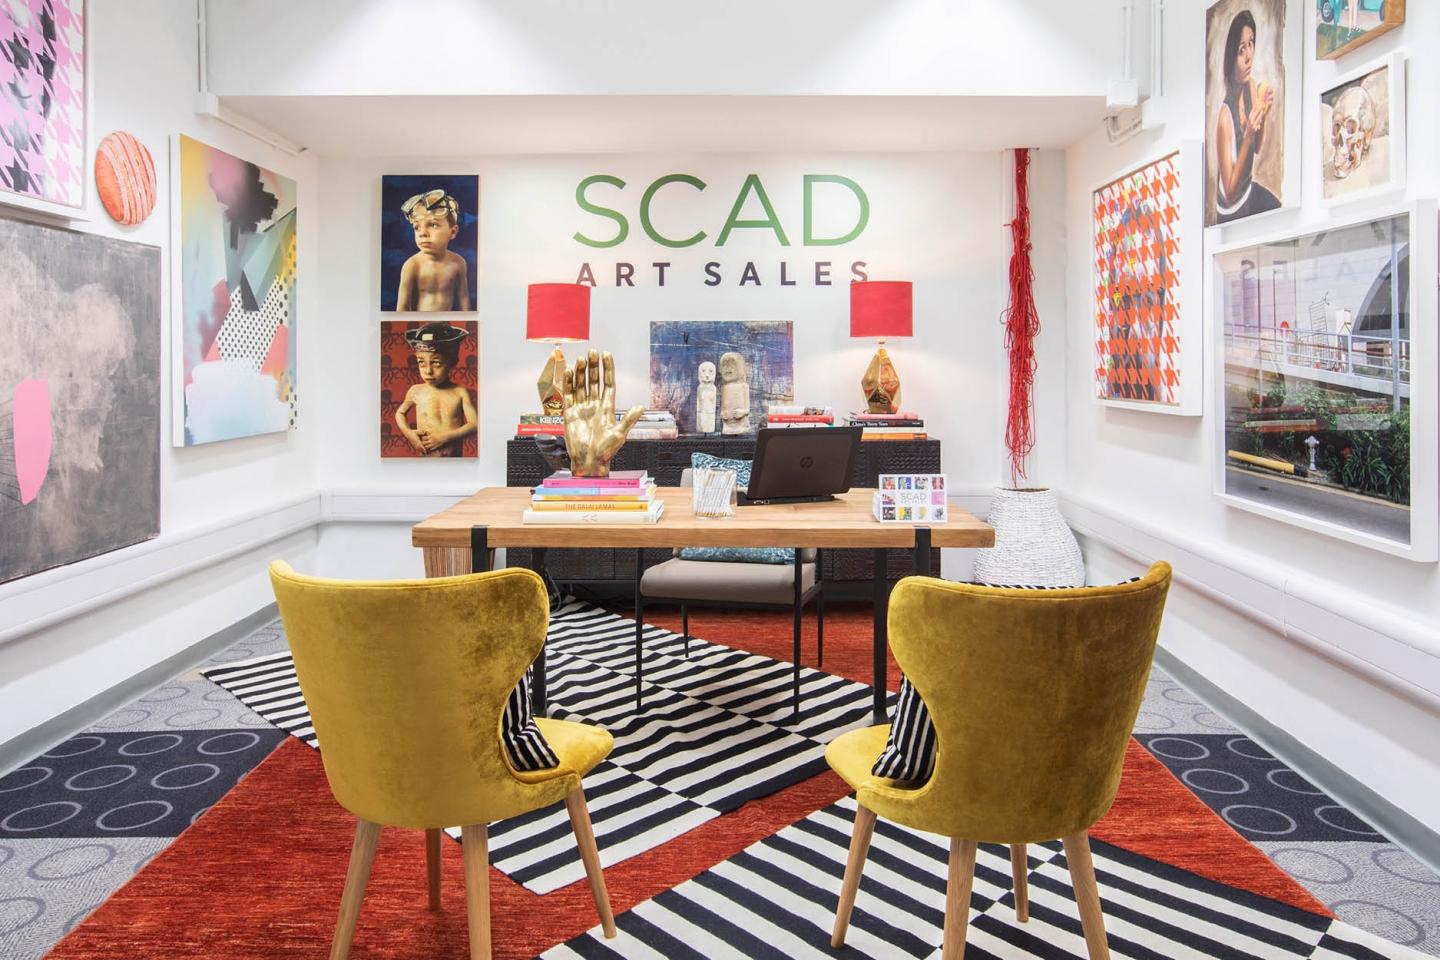 SCAD Art Sales harnesses the university’s unmatched network of artists and industry insiders to provide insightful advice for new collectors